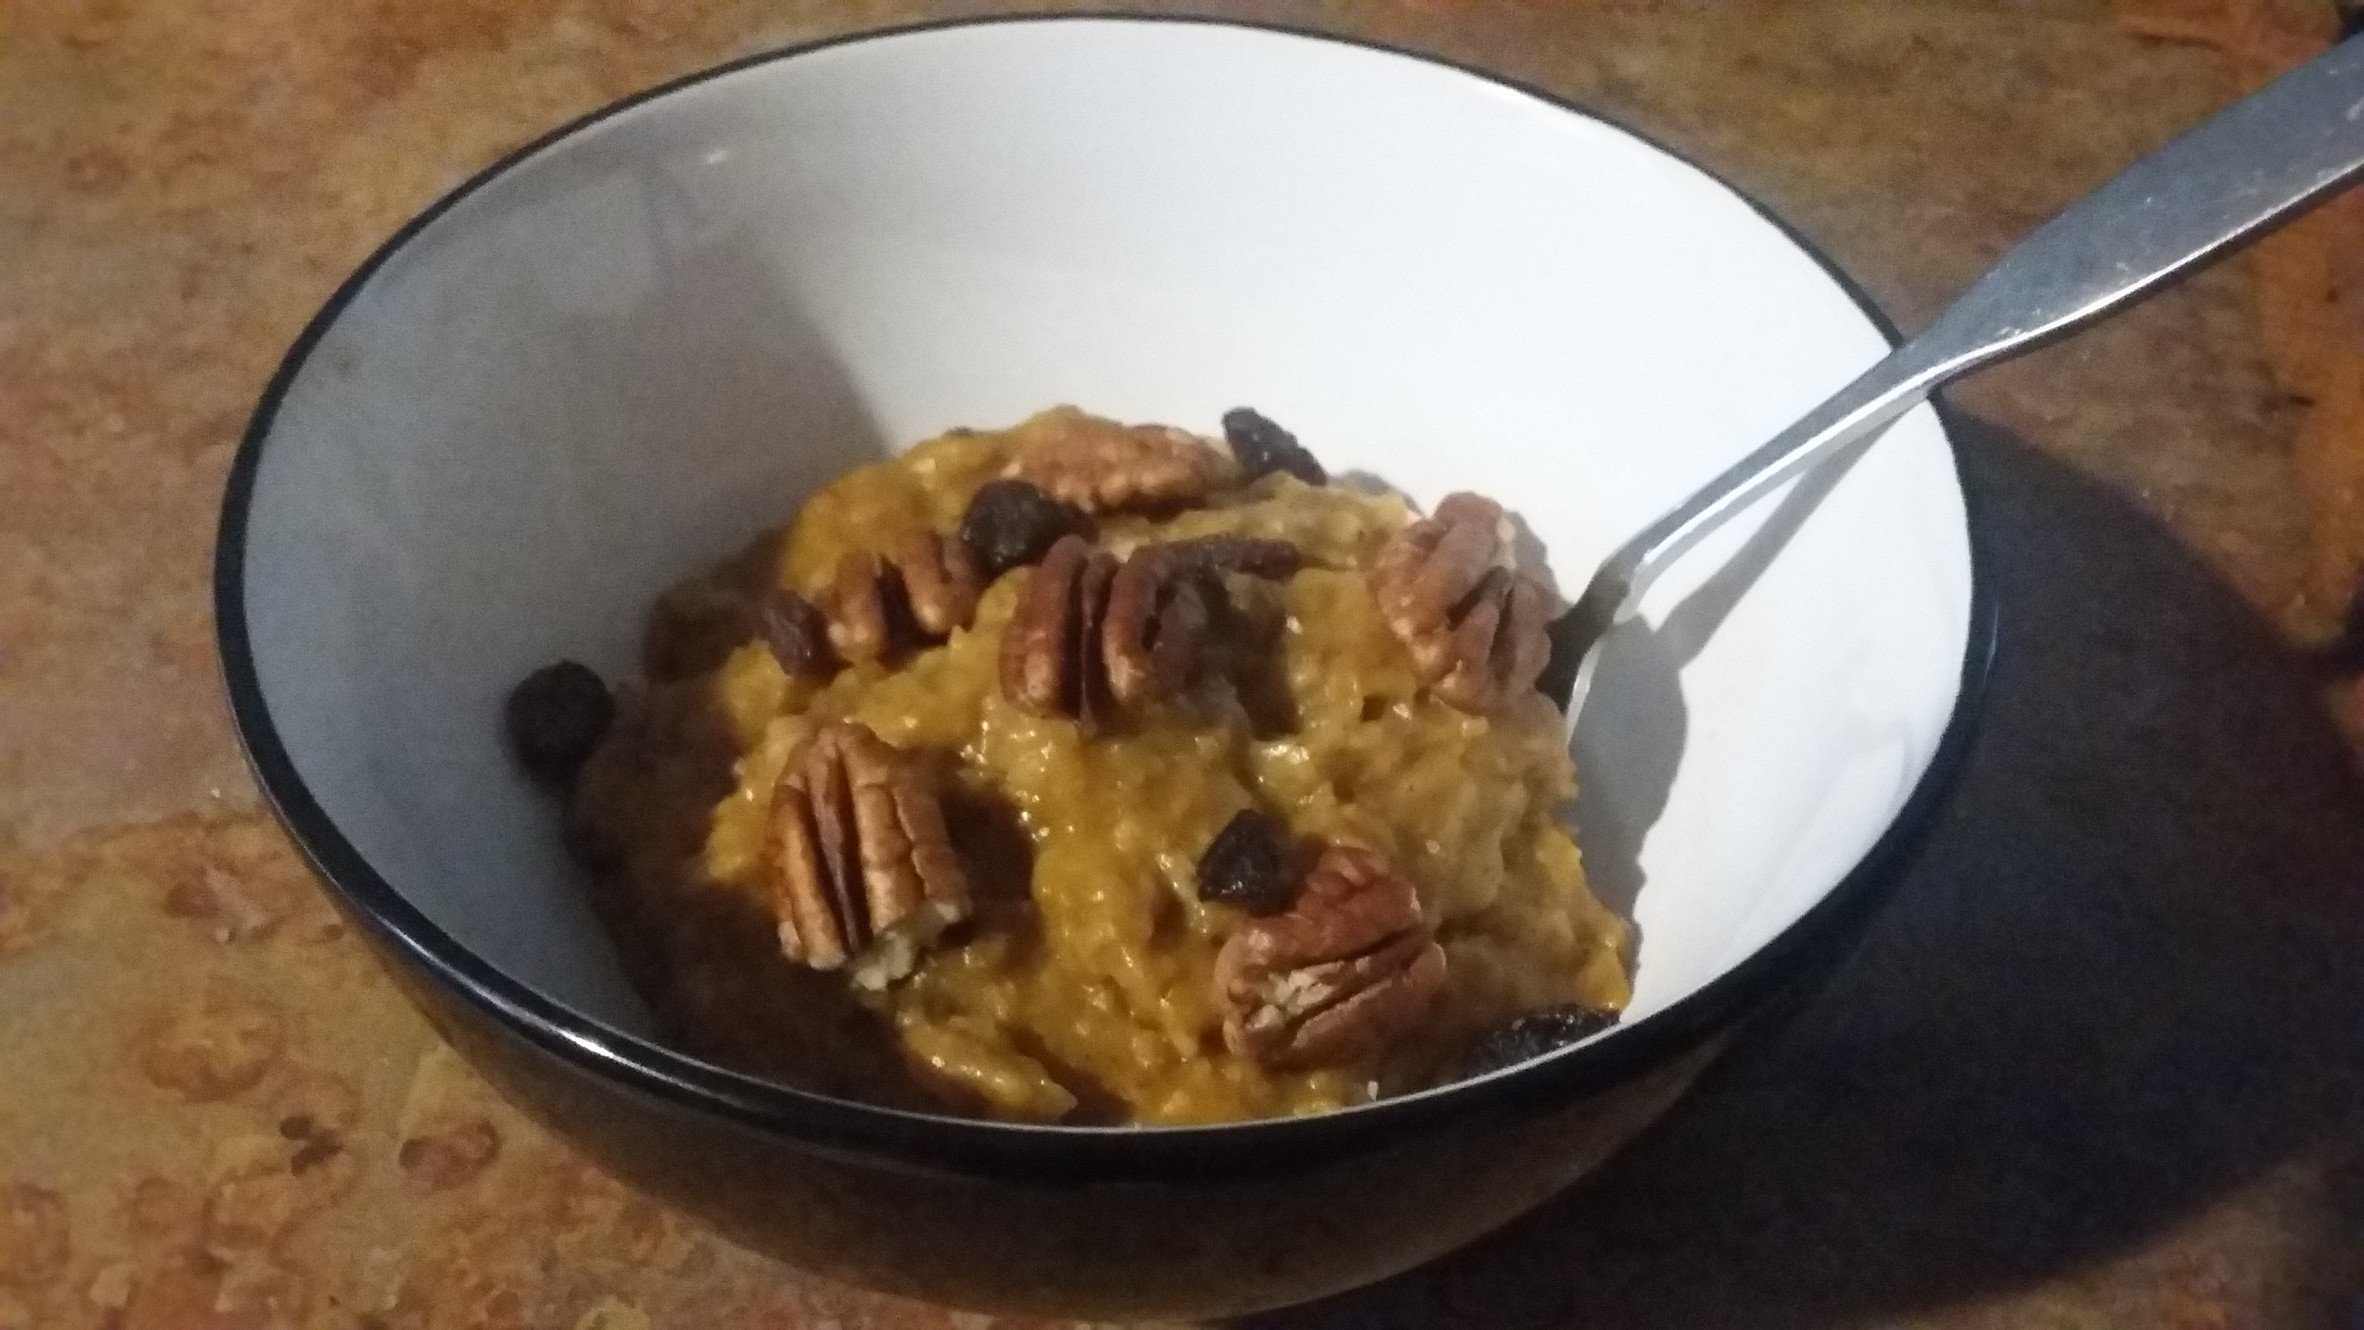 Slow Cooker Oatmeal Rolled Oats
 Overnight pumpkin oatmeal in the slow cooker with old